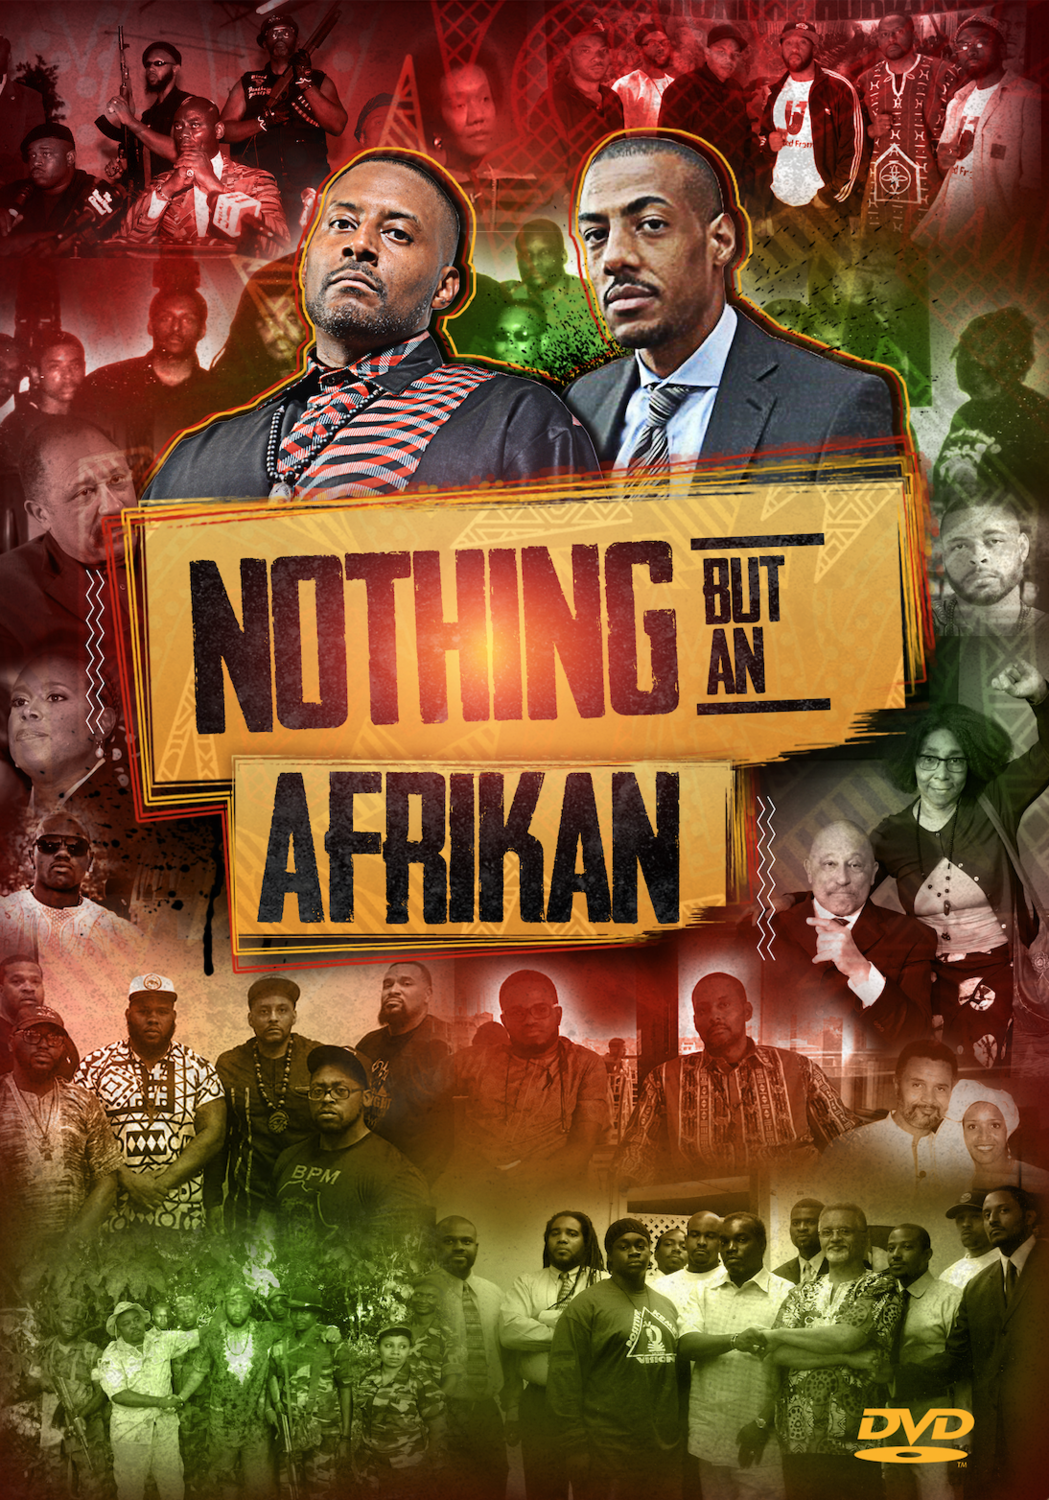 Nothing But an Afrikan (4-Disc DVD Set) - .mp4 Electronic Email Version